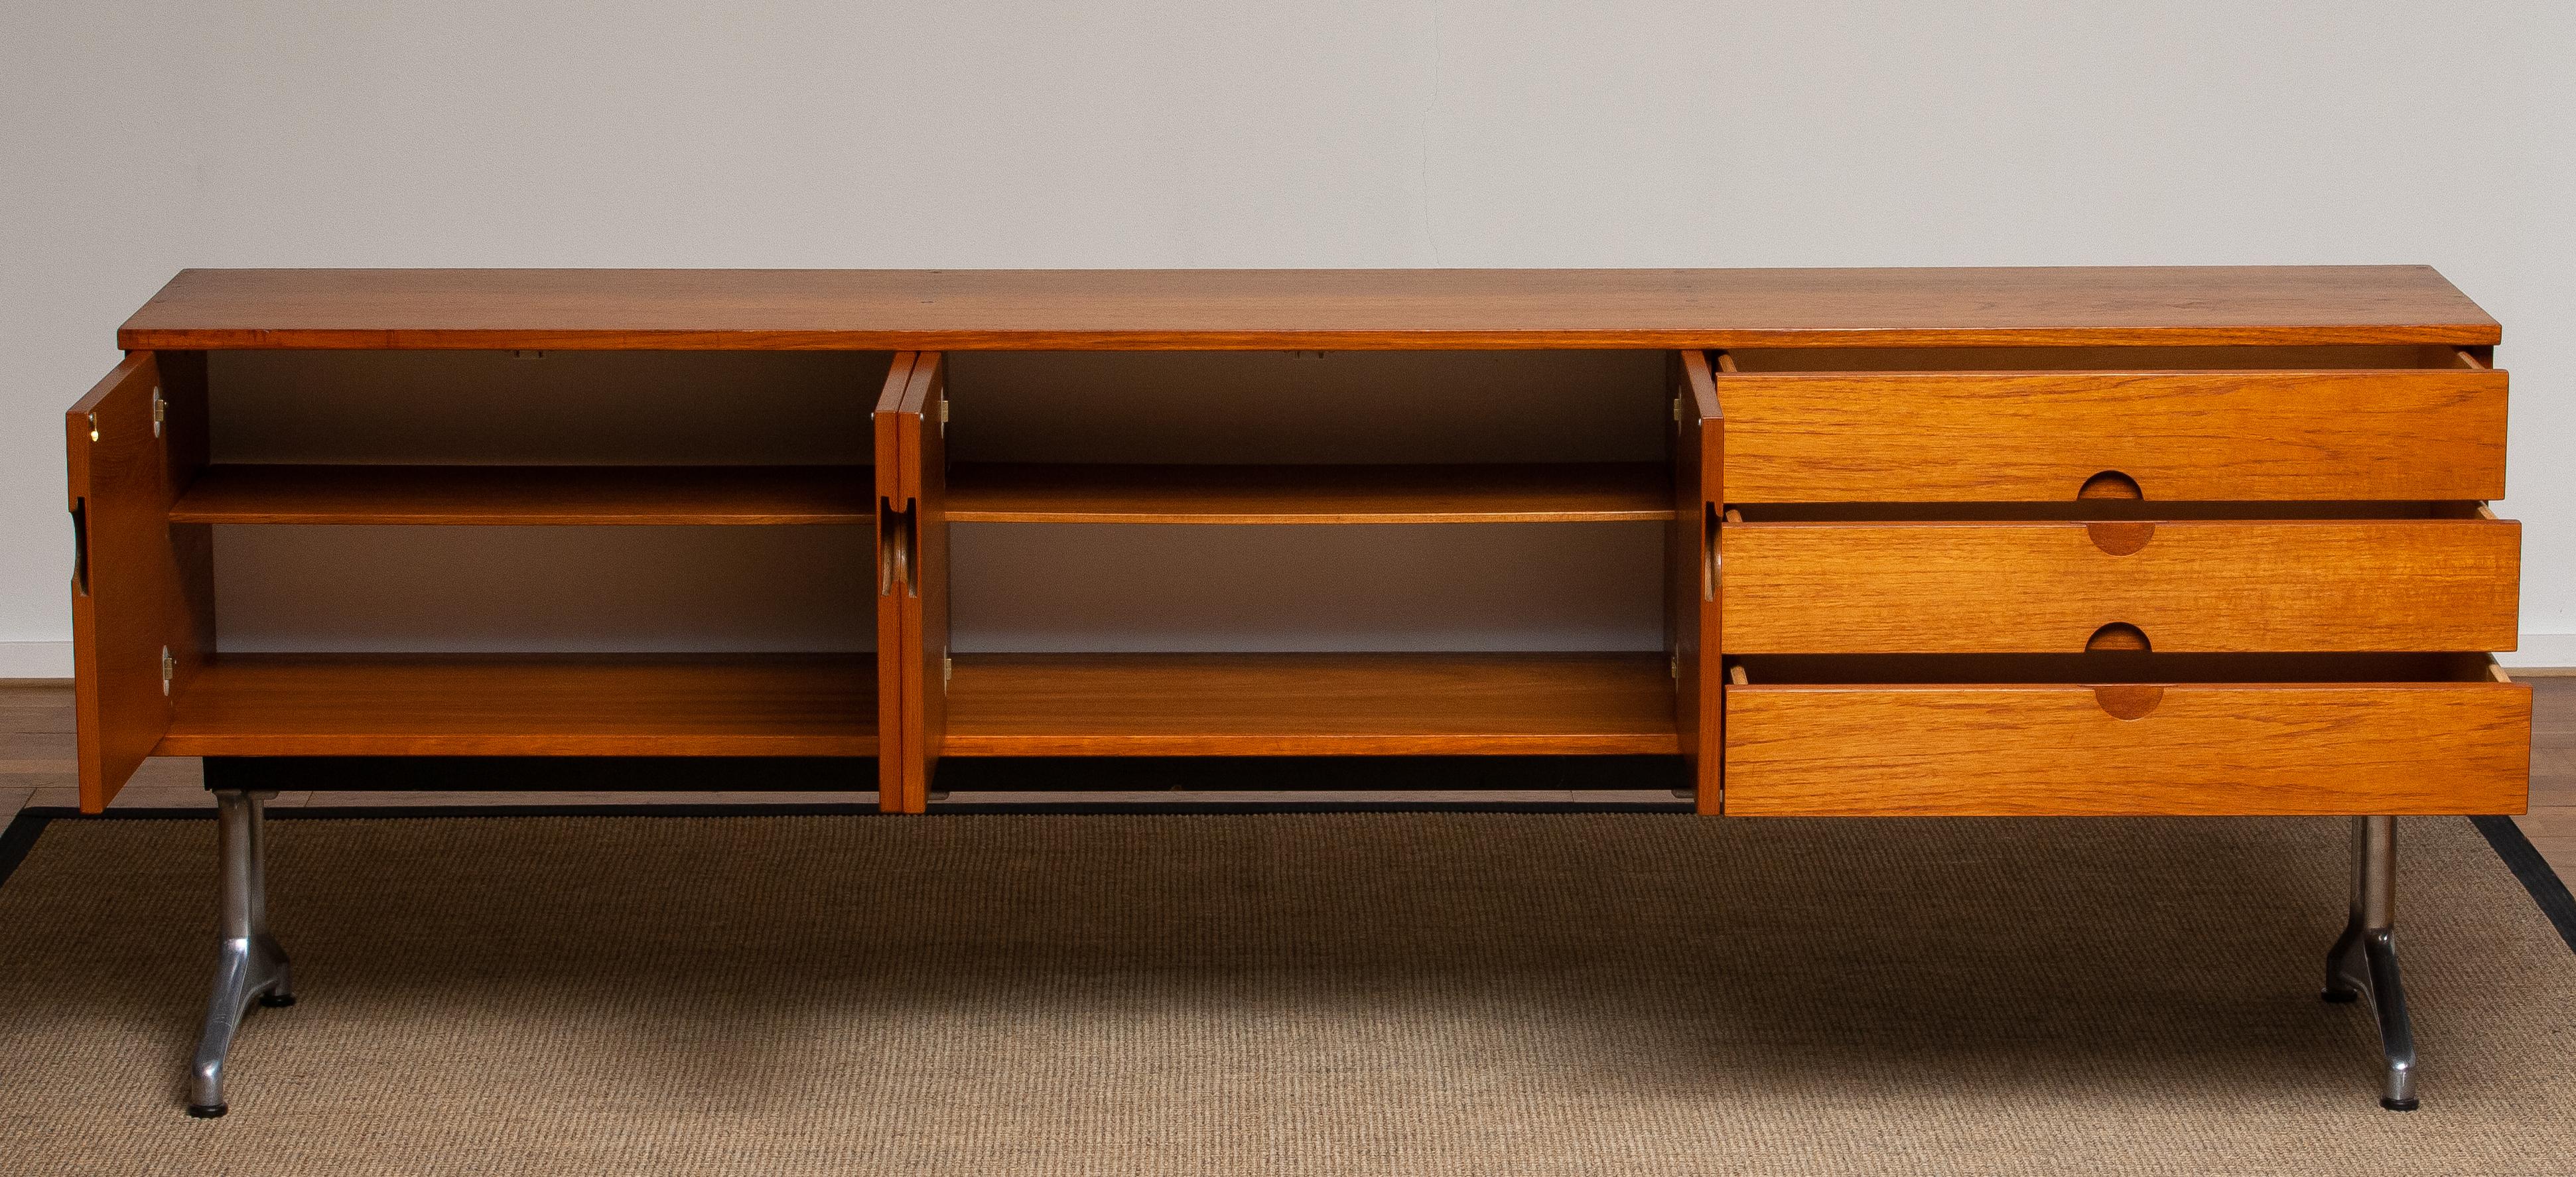 1960s Sideboard / Credenzas in Teak on a Aluminum Stand by Pertti Salmi, Norway 1